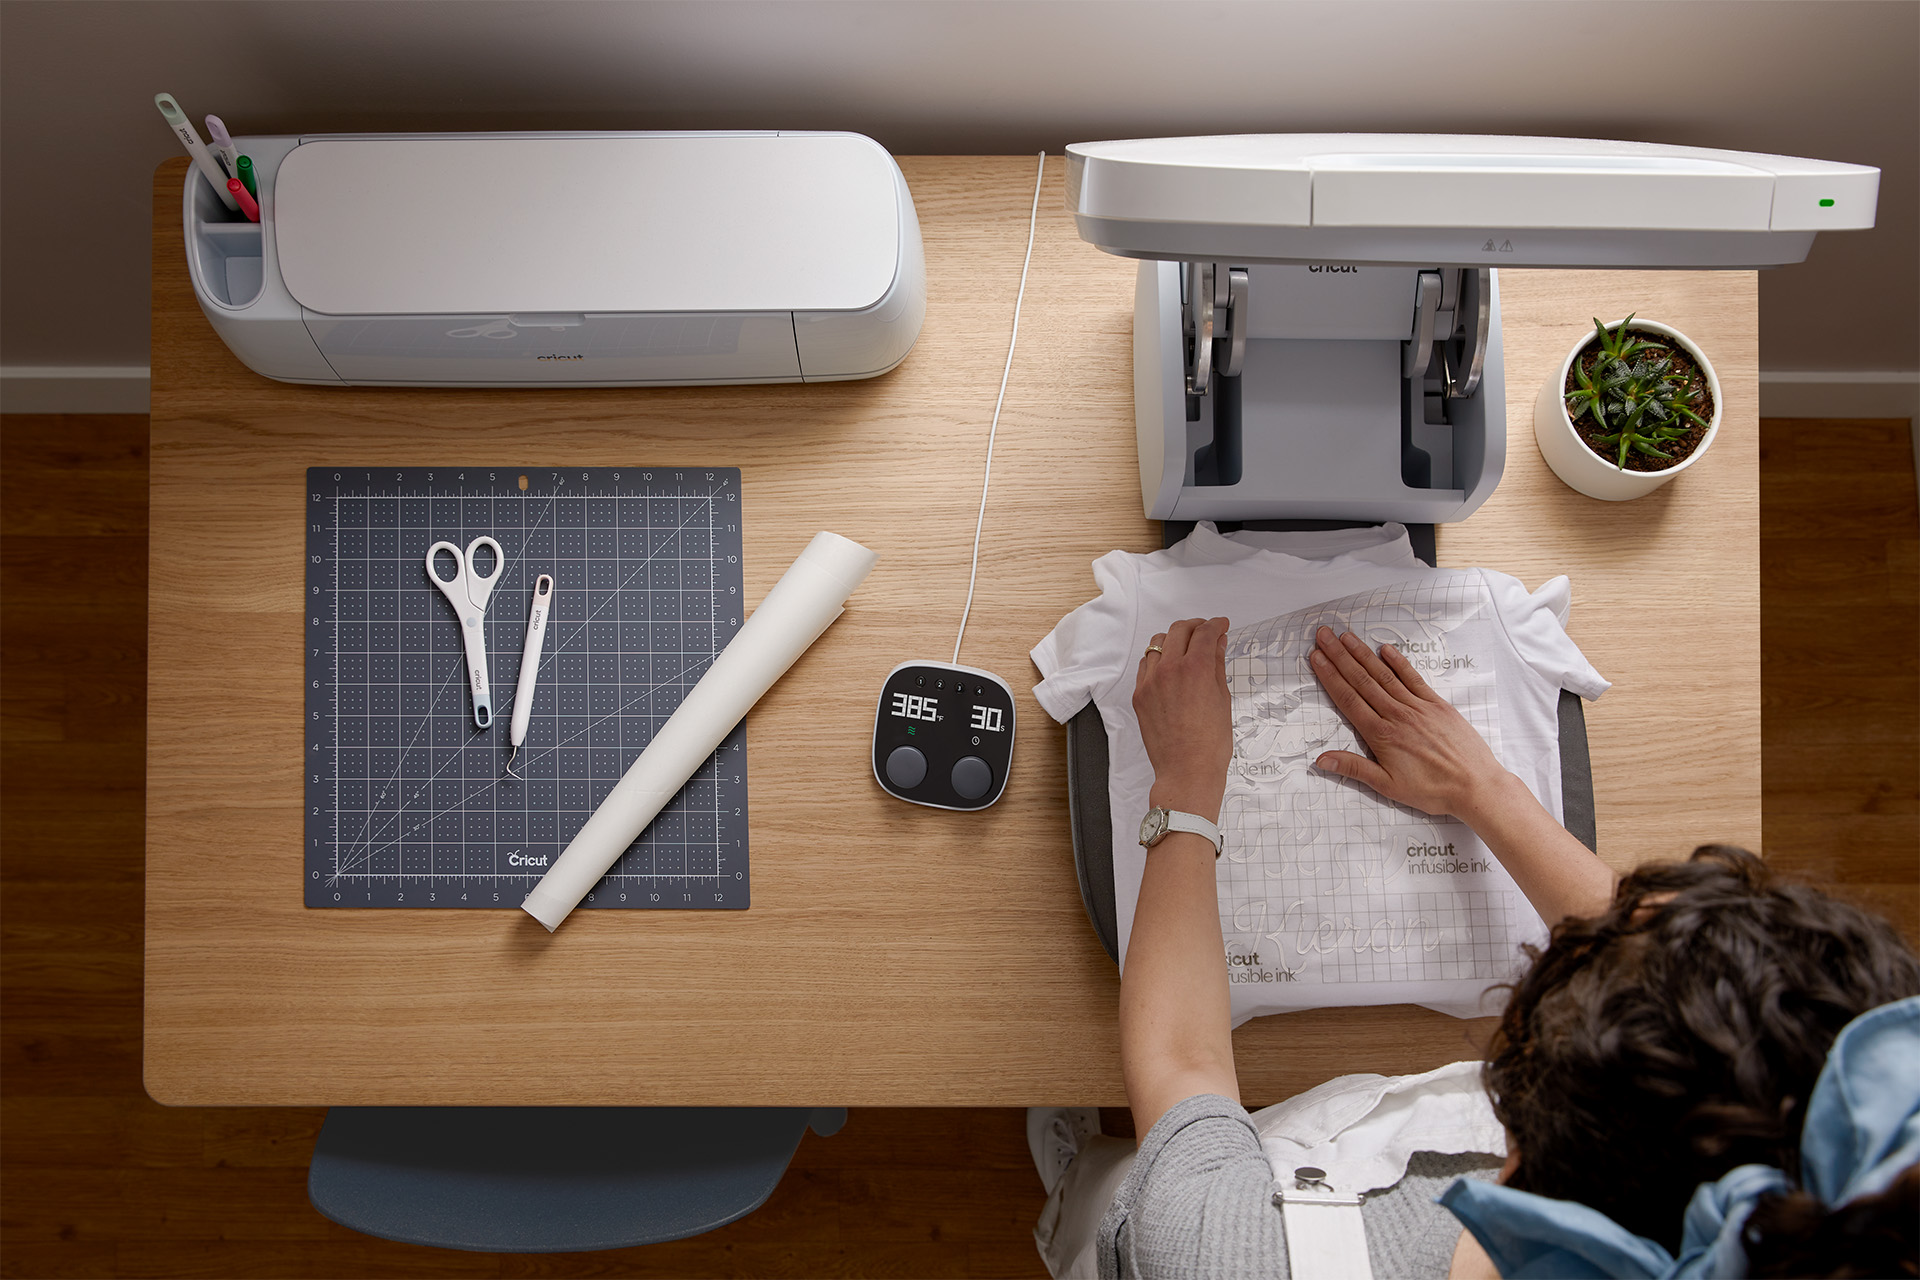 Cricut Autopress: Everything You Need to Know About Cricut's Best